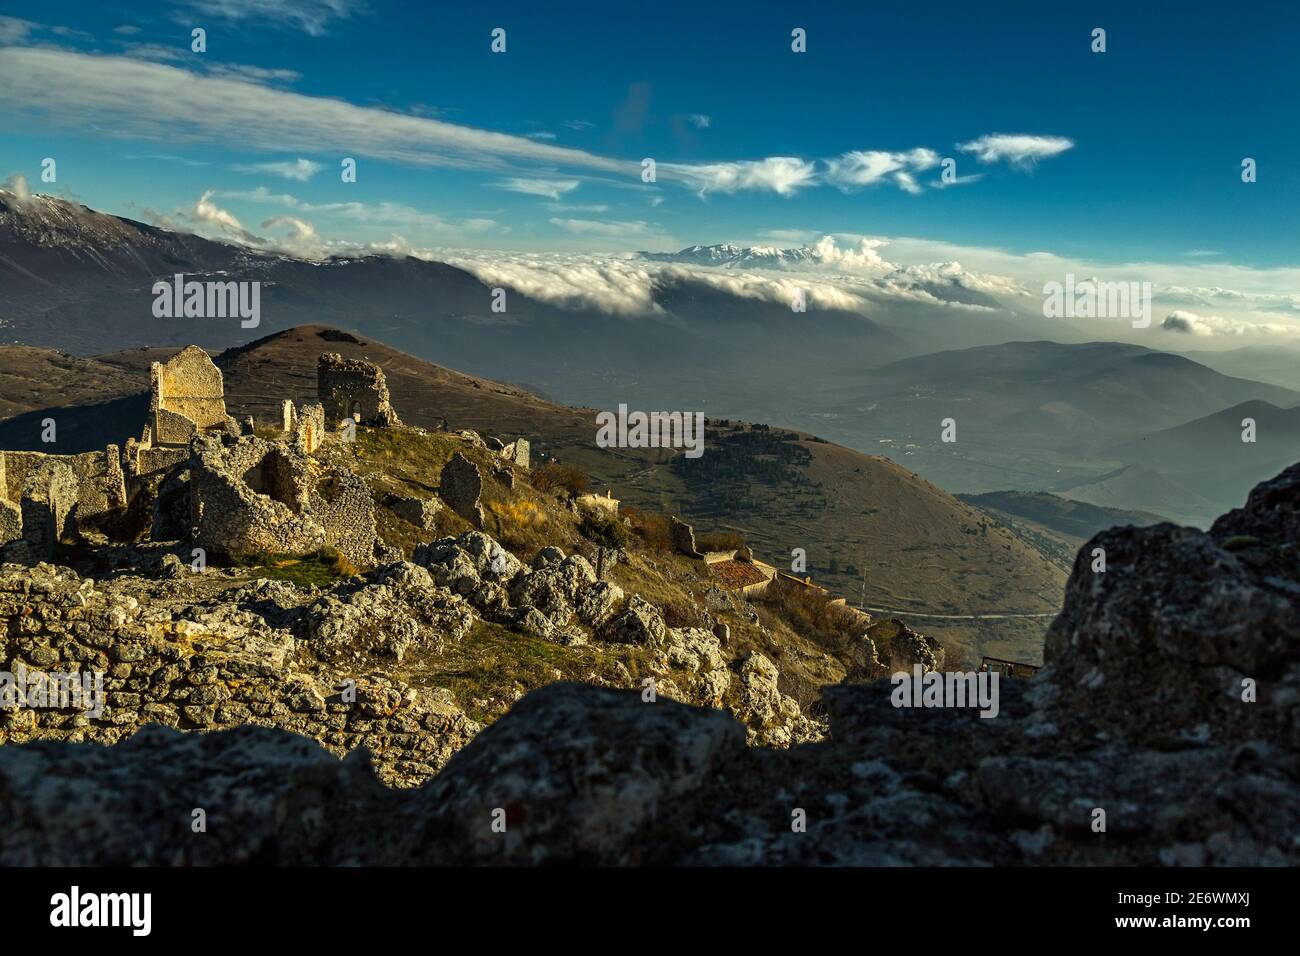 The snow-capped peaks of the Maiella mountain range seen from the ruins of the ancient village of Rocca Calascio. Abruzzo, Italy Stock Photo